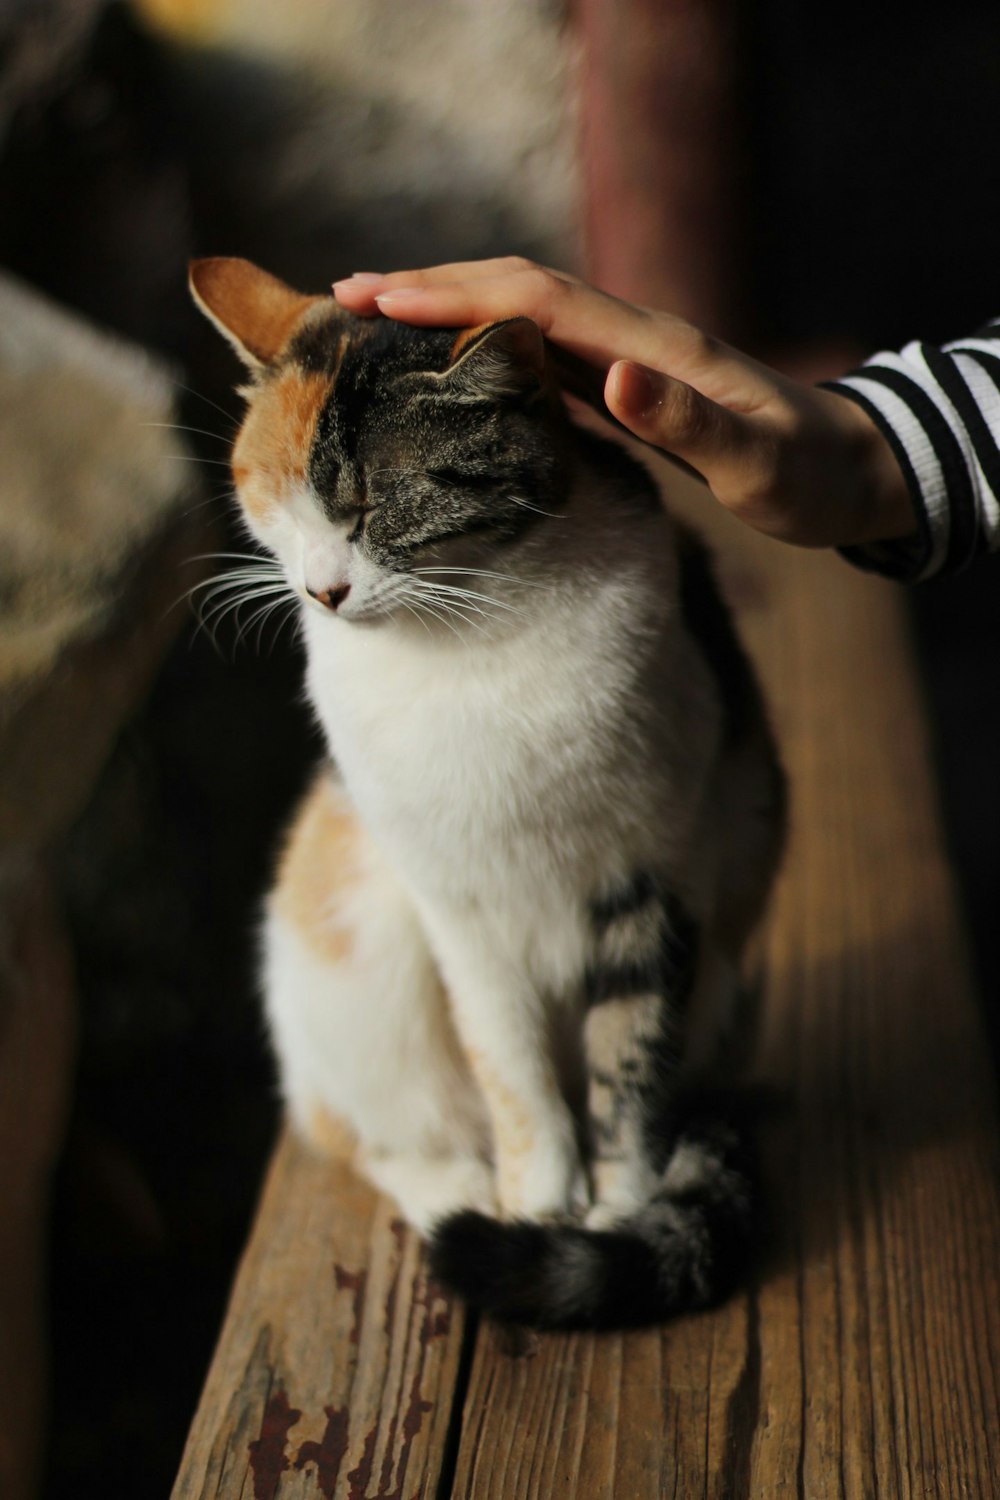 person touching cat's head